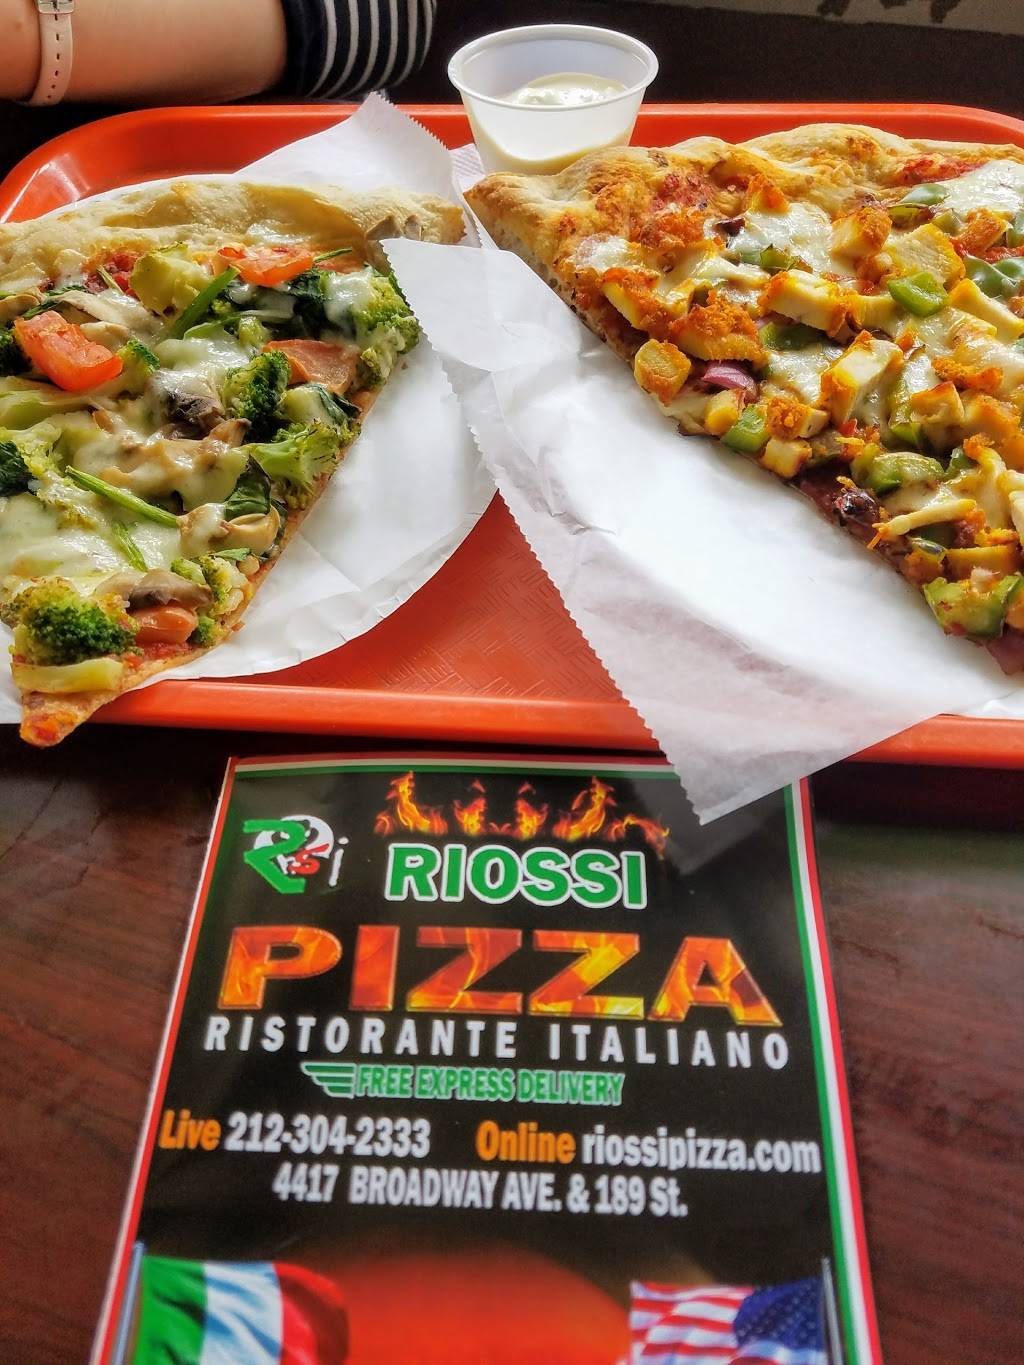 Riossi Pizza | meal delivery | 4417 Broadway, New York, NY 10040, USA | 2123042333 OR +1 212-304-2333